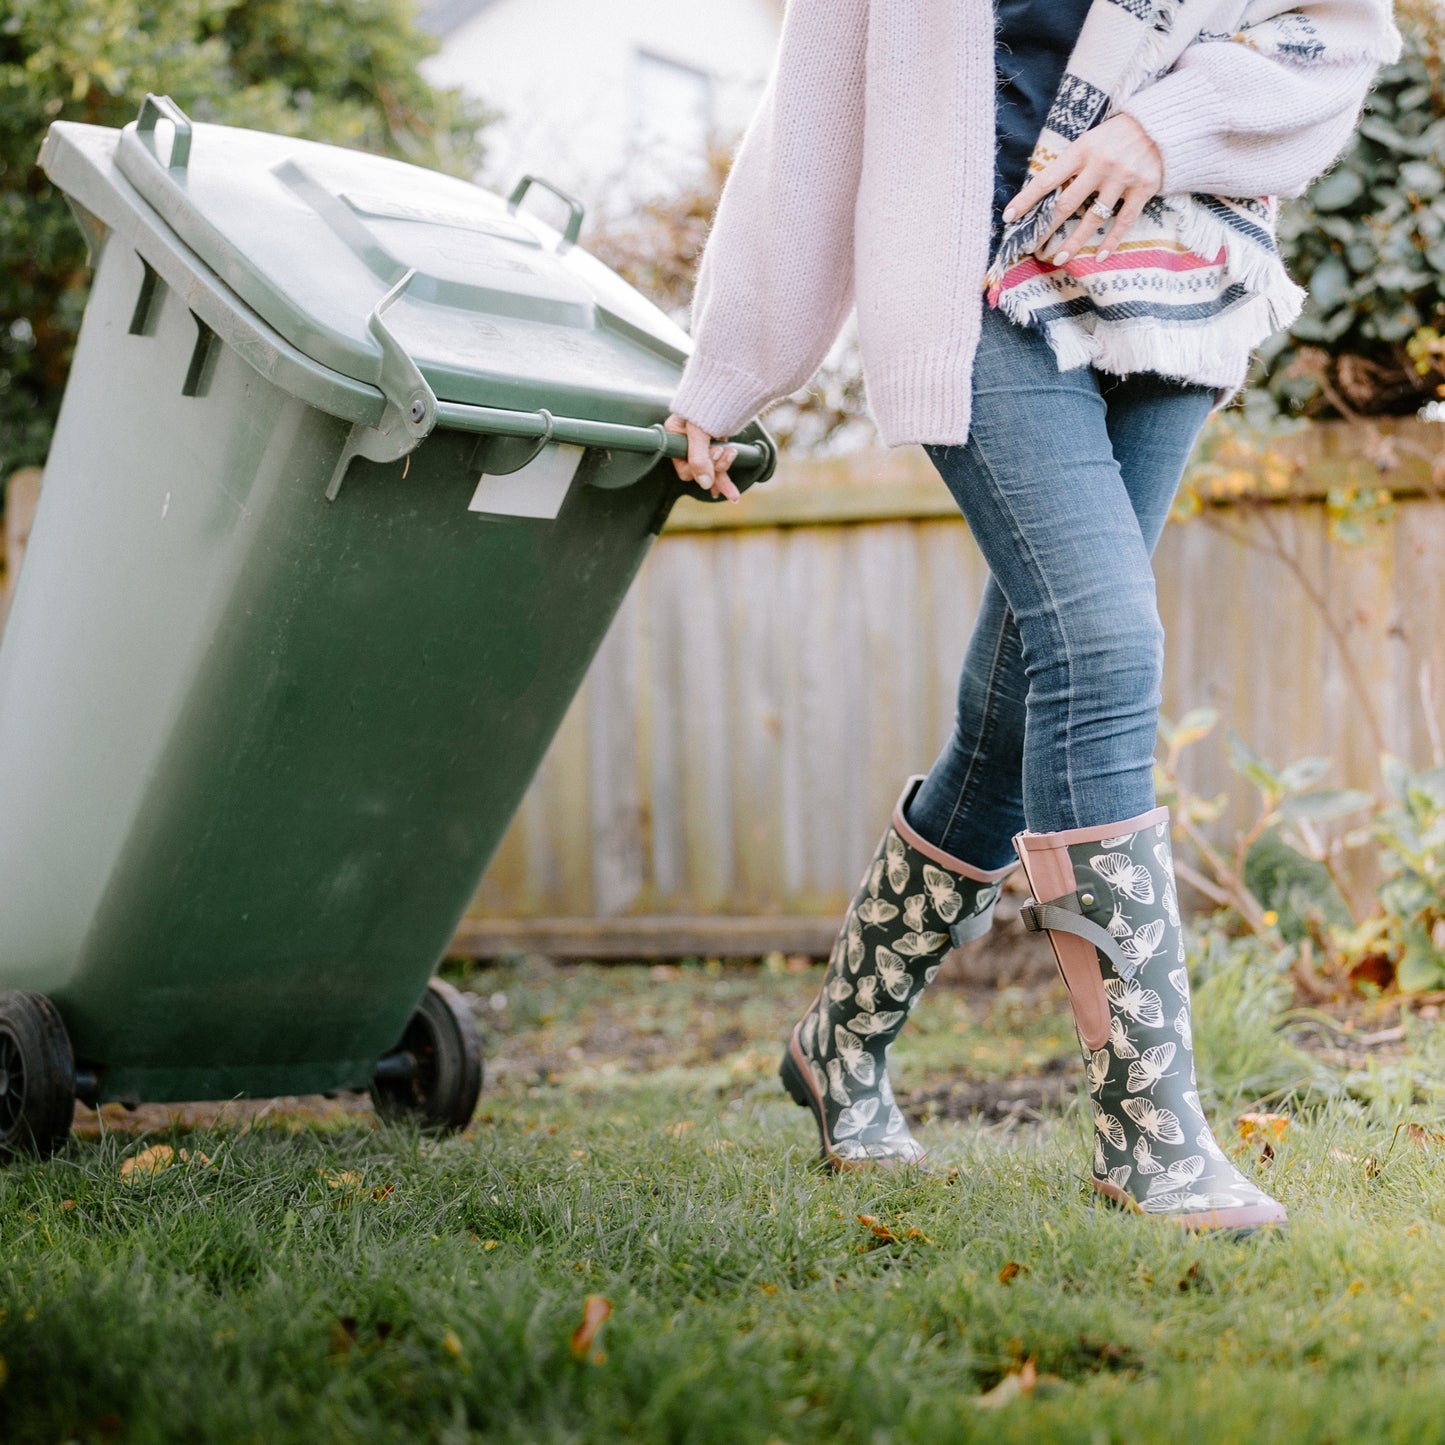 wellies to take bins out